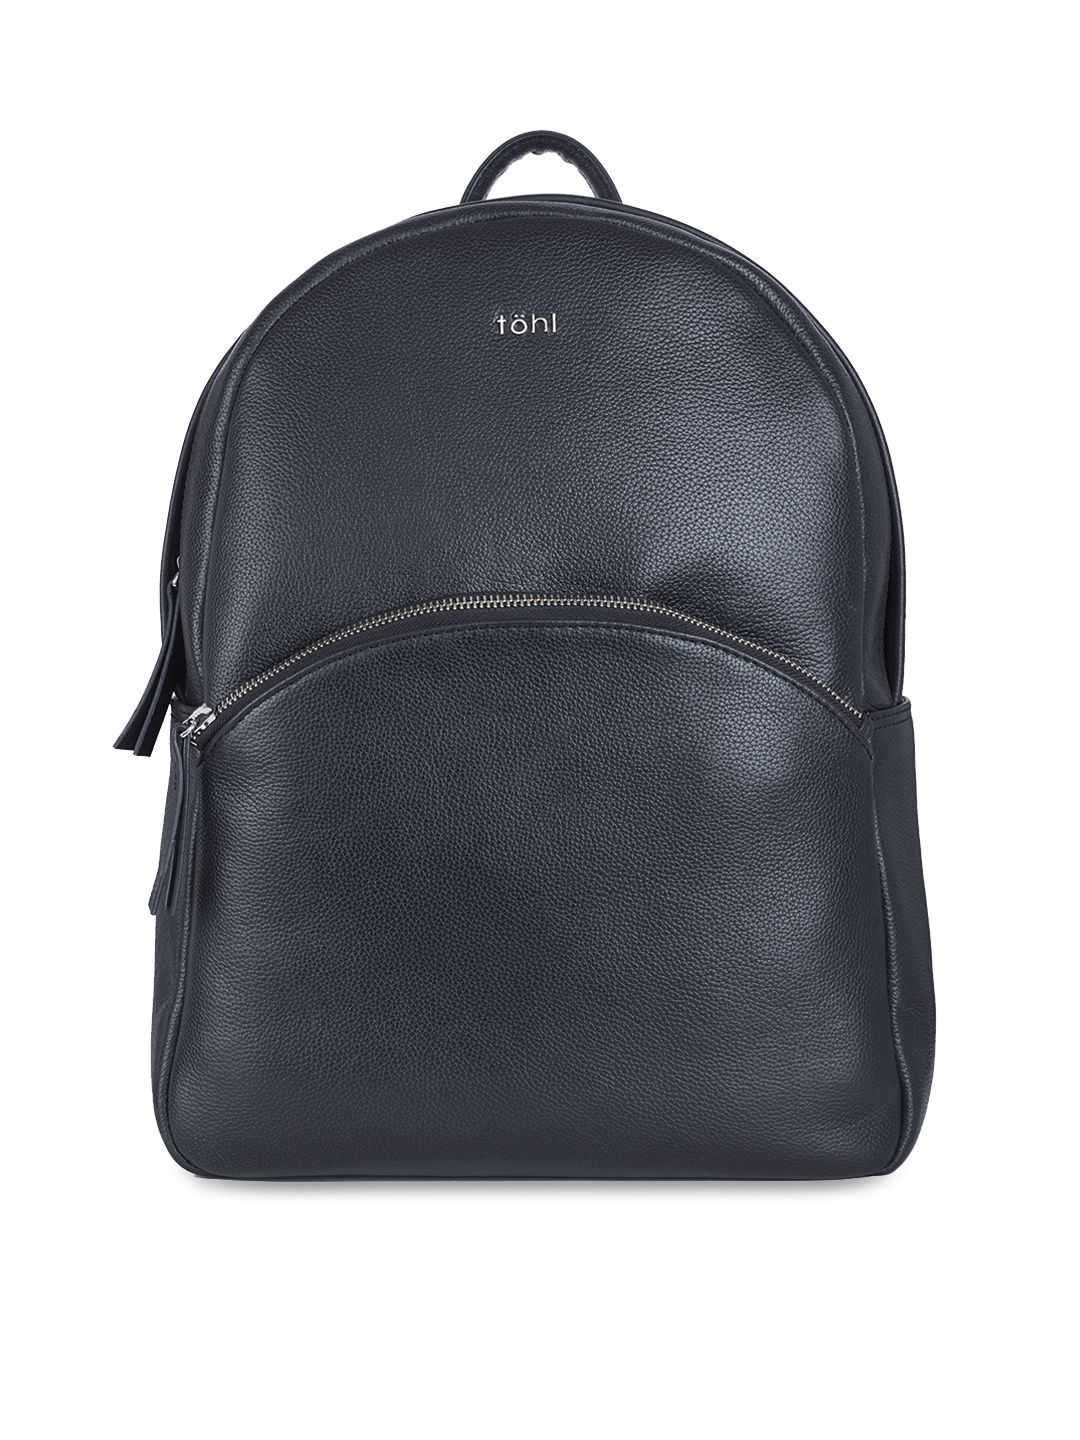 tohl Women Black Textured Backpack Price in India